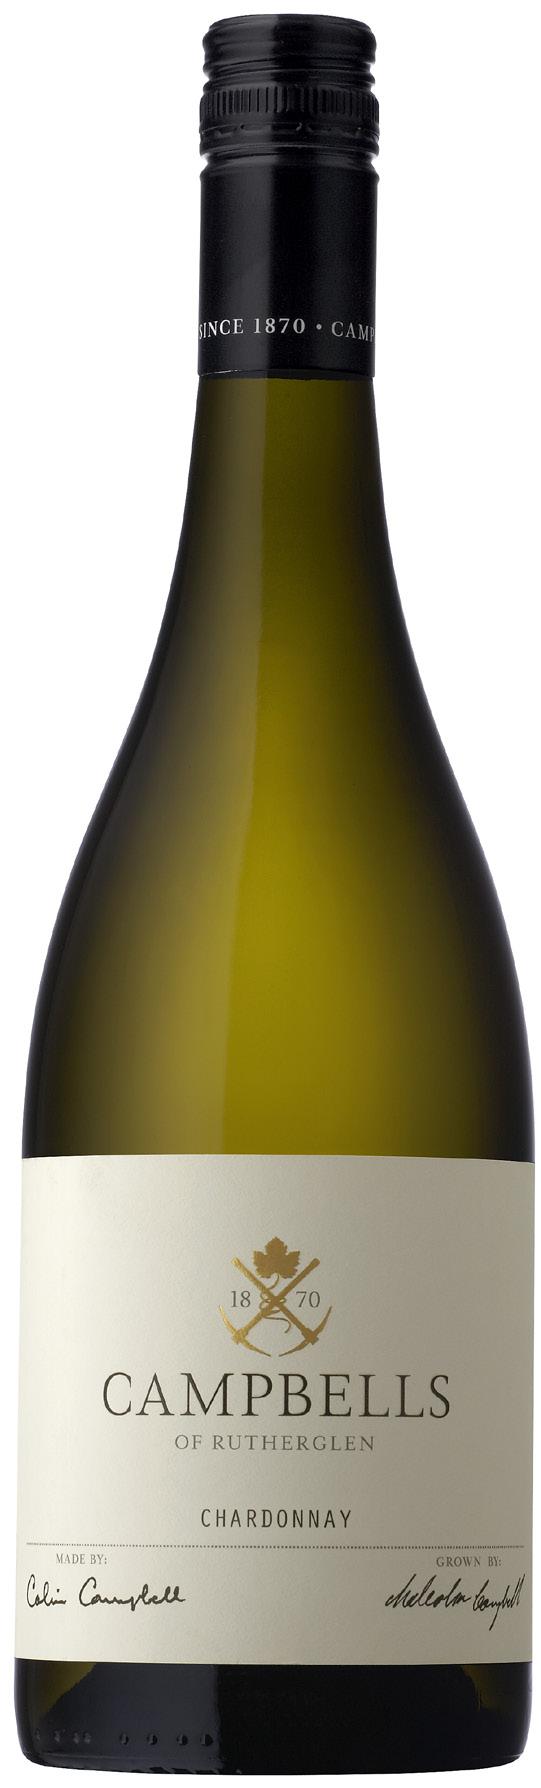 CHARDONNAY 2017 My favoured style where the fruit is dominant, displaying the pure flavours we can achieve with chardonnay fruit grown in the Rutherglen wine region.